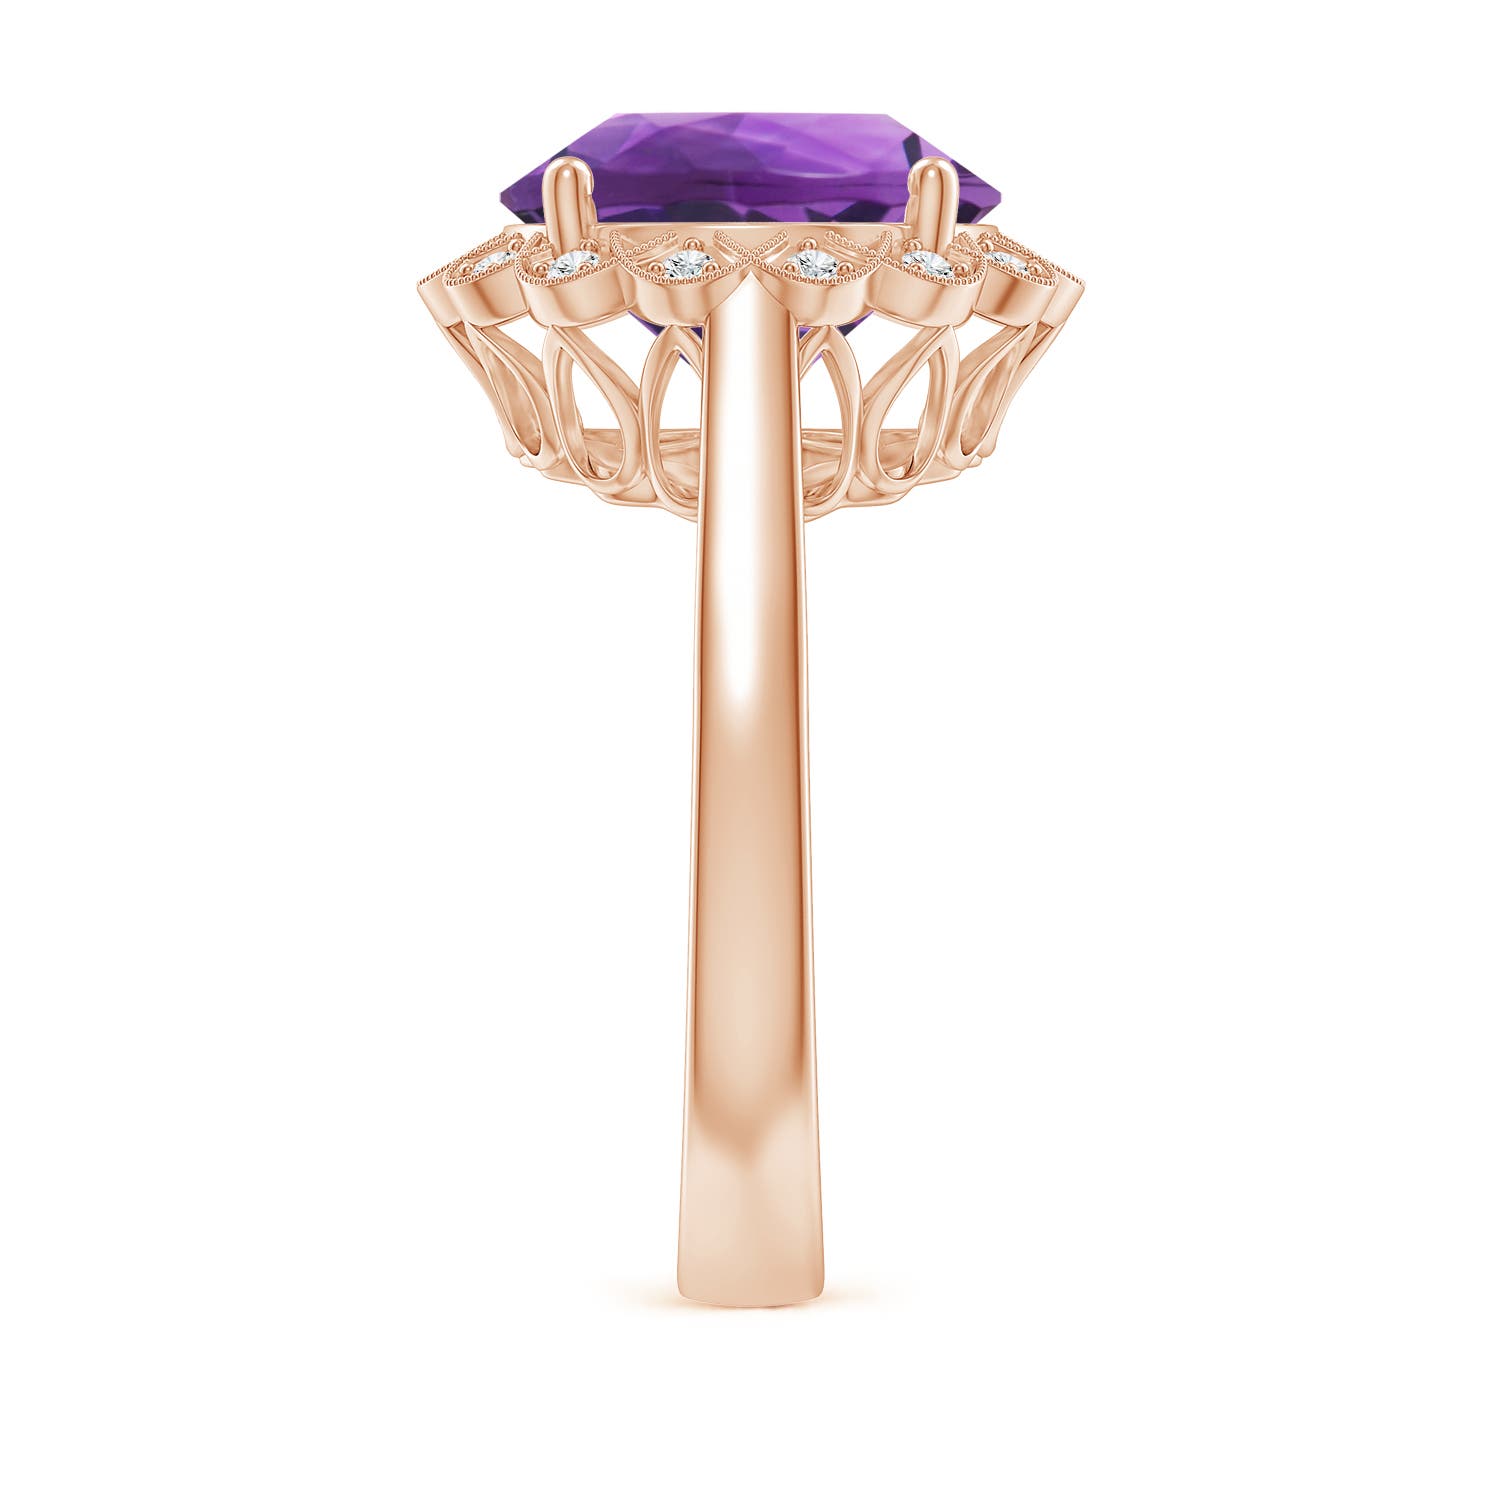 AAA - Amethyst / 4.86 CT / 14 KT Rose Gold